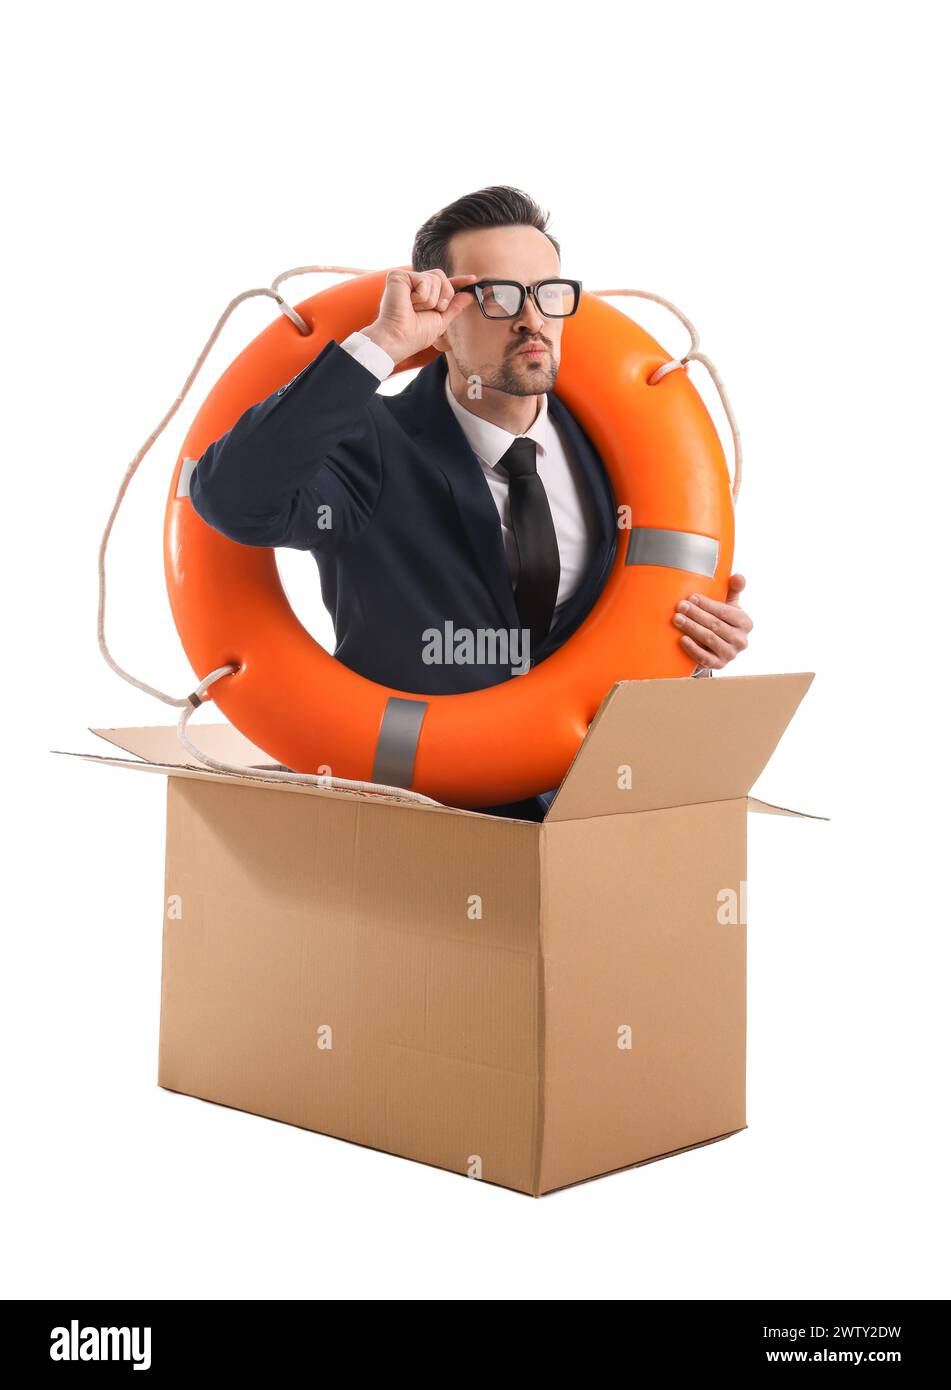 Funny businessman with ring buoy swimming in cardboard box on white background Stock Photo